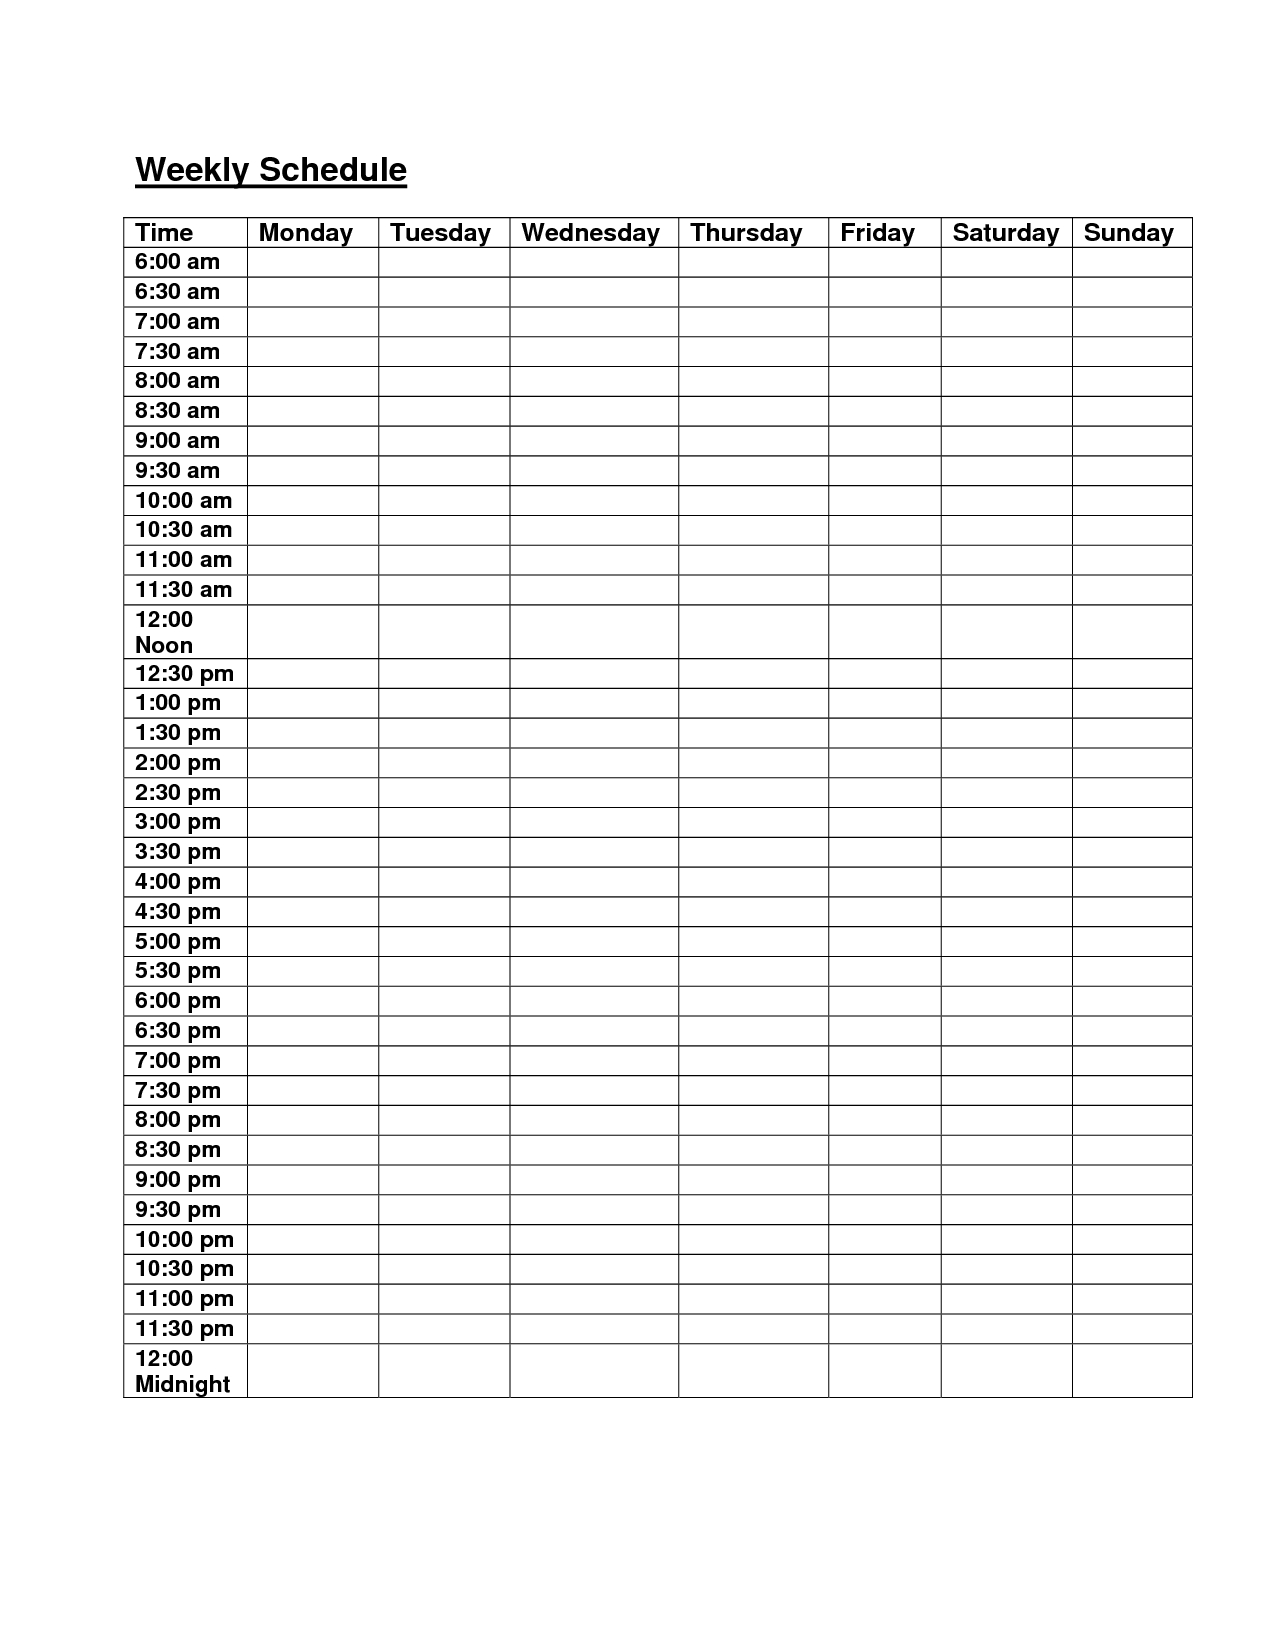 Weekly Schedule Template Monday Friday Qkgmvrjv | Printables-Monday - Friday Timetable Template